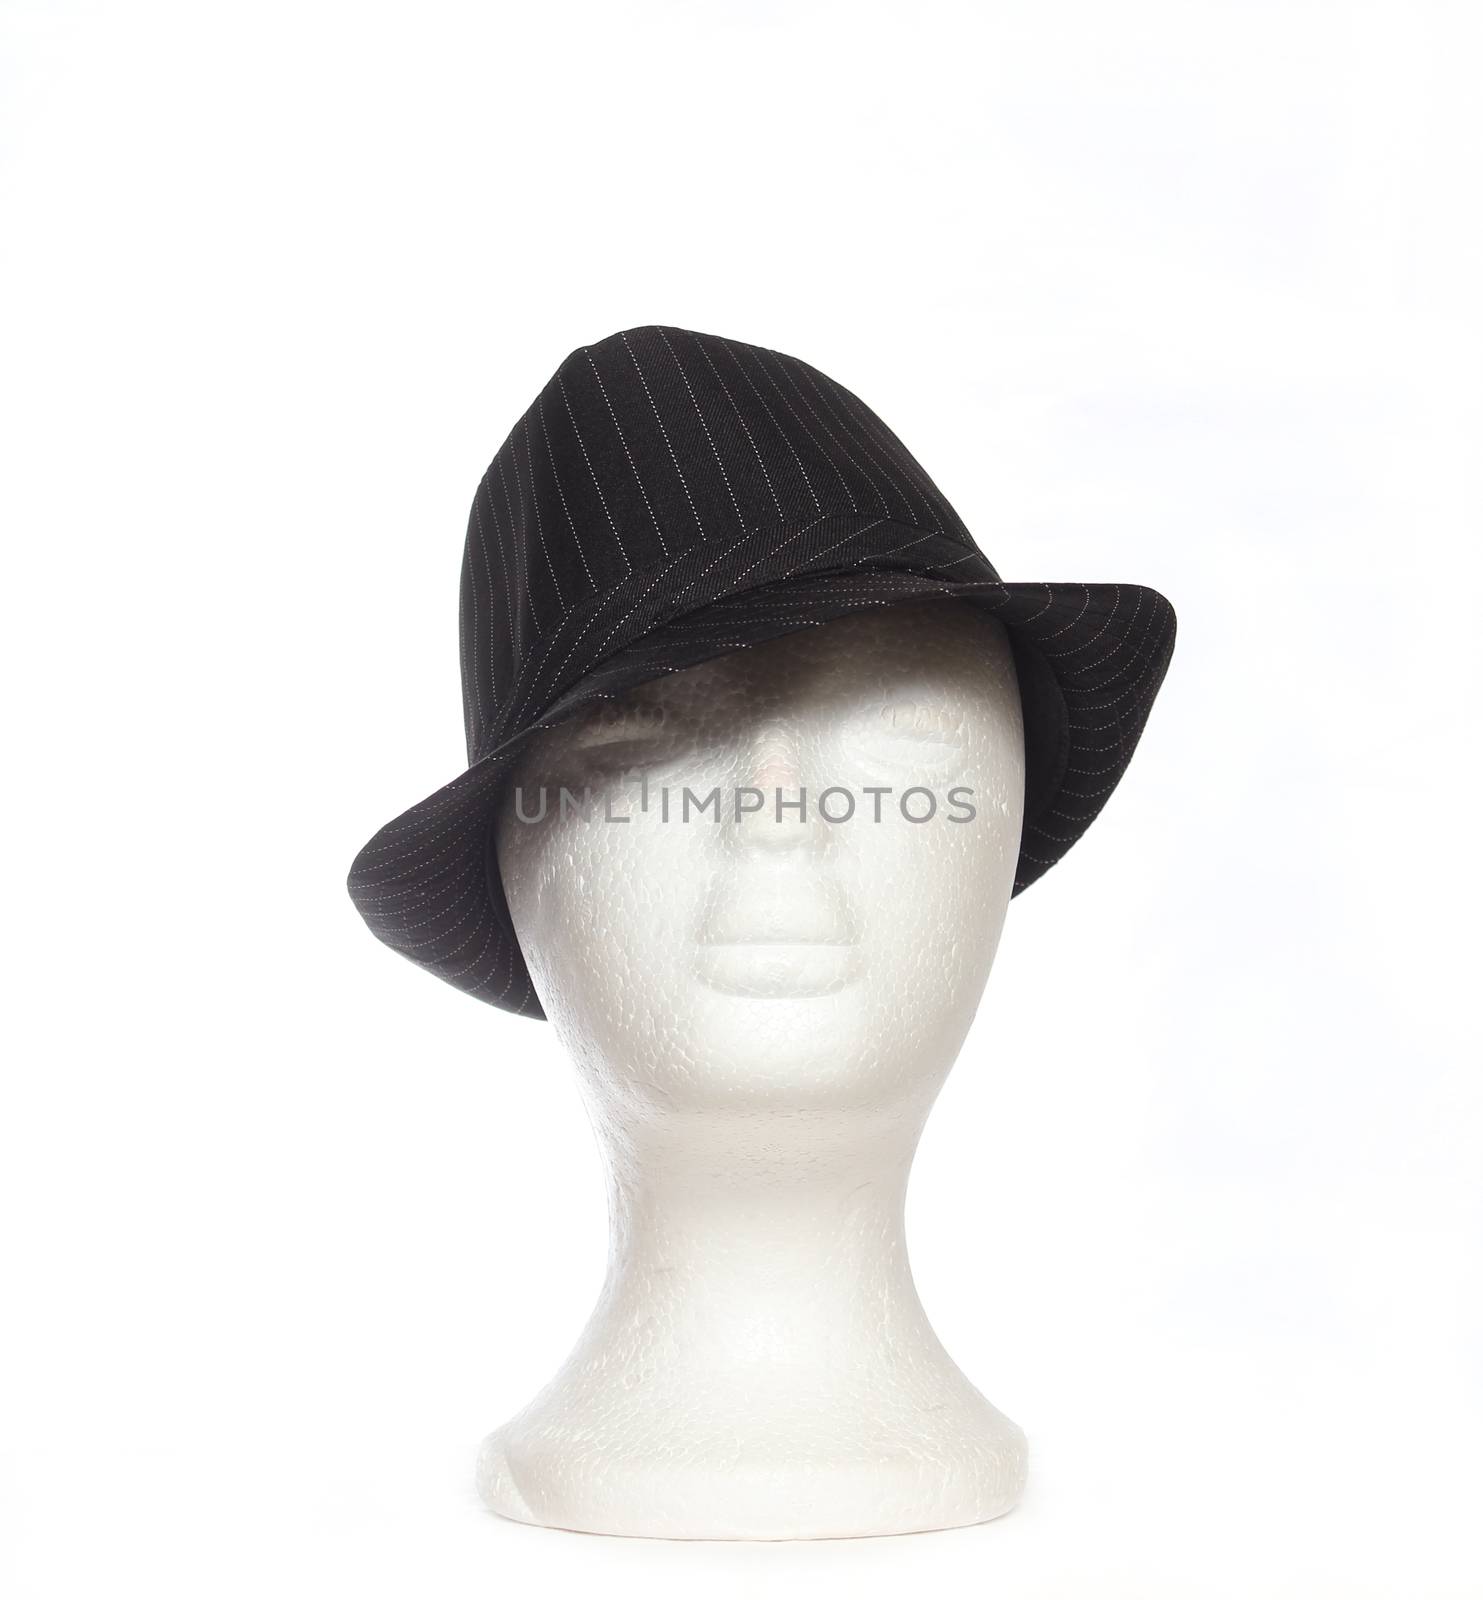 Classic Fedora Hat on Mannequin Head Isolated on White